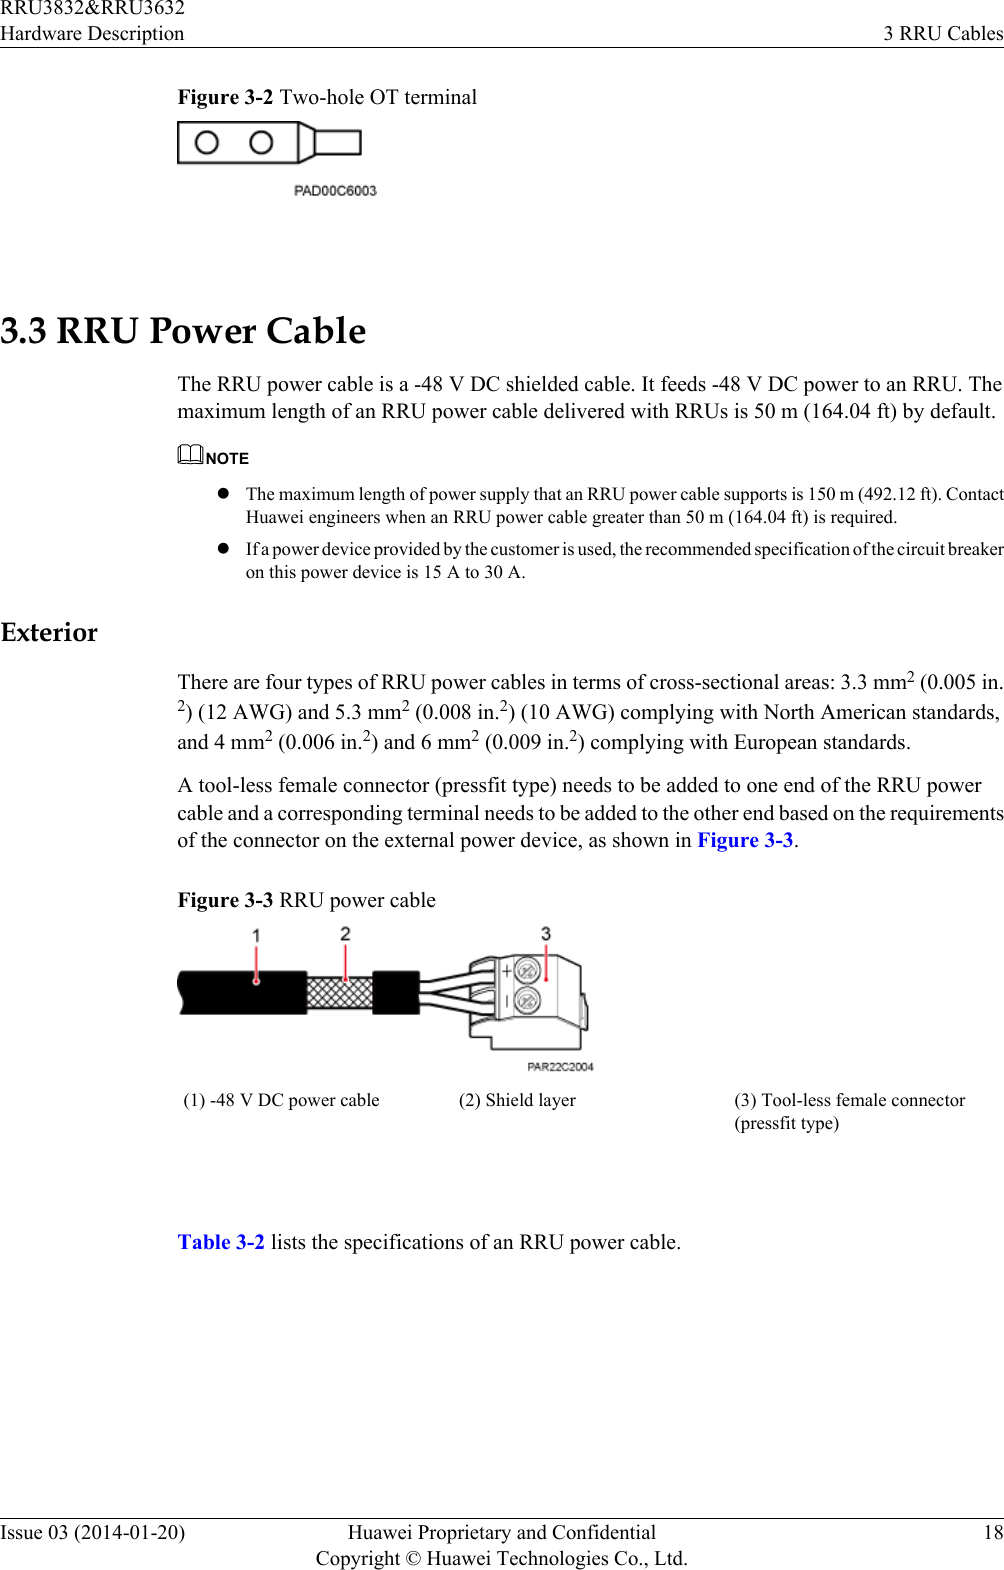 Figure 3-2 Two-hole OT terminal 3.3 RRU Power CableThe RRU power cable is a -48 V DC shielded cable. It feeds -48 V DC power to an RRU. Themaximum length of an RRU power cable delivered with RRUs is 50 m (164.04 ft) by default.NOTElThe maximum length of power supply that an RRU power cable supports is 150 m (492.12 ft). ContactHuawei engineers when an RRU power cable greater than 50 m (164.04 ft) is required.lIf a power device provided by the customer is used, the recommended specification of the circuit breakeron this power device is 15 A to 30 A.ExteriorThere are four types of RRU power cables in terms of cross-sectional areas: 3.3 mm2 (0.005 in.2) (12 AWG) and 5.3 mm2 (0.008 in.2) (10 AWG) complying with North American standards,and 4 mm2 (0.006 in.2) and 6 mm2 (0.009 in.2) complying with European standards.A tool-less female connector (pressfit type) needs to be added to one end of the RRU powercable and a corresponding terminal needs to be added to the other end based on the requirementsof the connector on the external power device, as shown in Figure 3-3.Figure 3-3 RRU power cable(1) -48 V DC power cable (2) Shield layer (3) Tool-less female connector(pressfit type) Table 3-2 lists the specifications of an RRU power cable.RRU3832&amp;RRU3632Hardware Description 3 RRU CablesIssue 03 (2014-01-20) Huawei Proprietary and ConfidentialCopyright © Huawei Technologies Co., Ltd.18